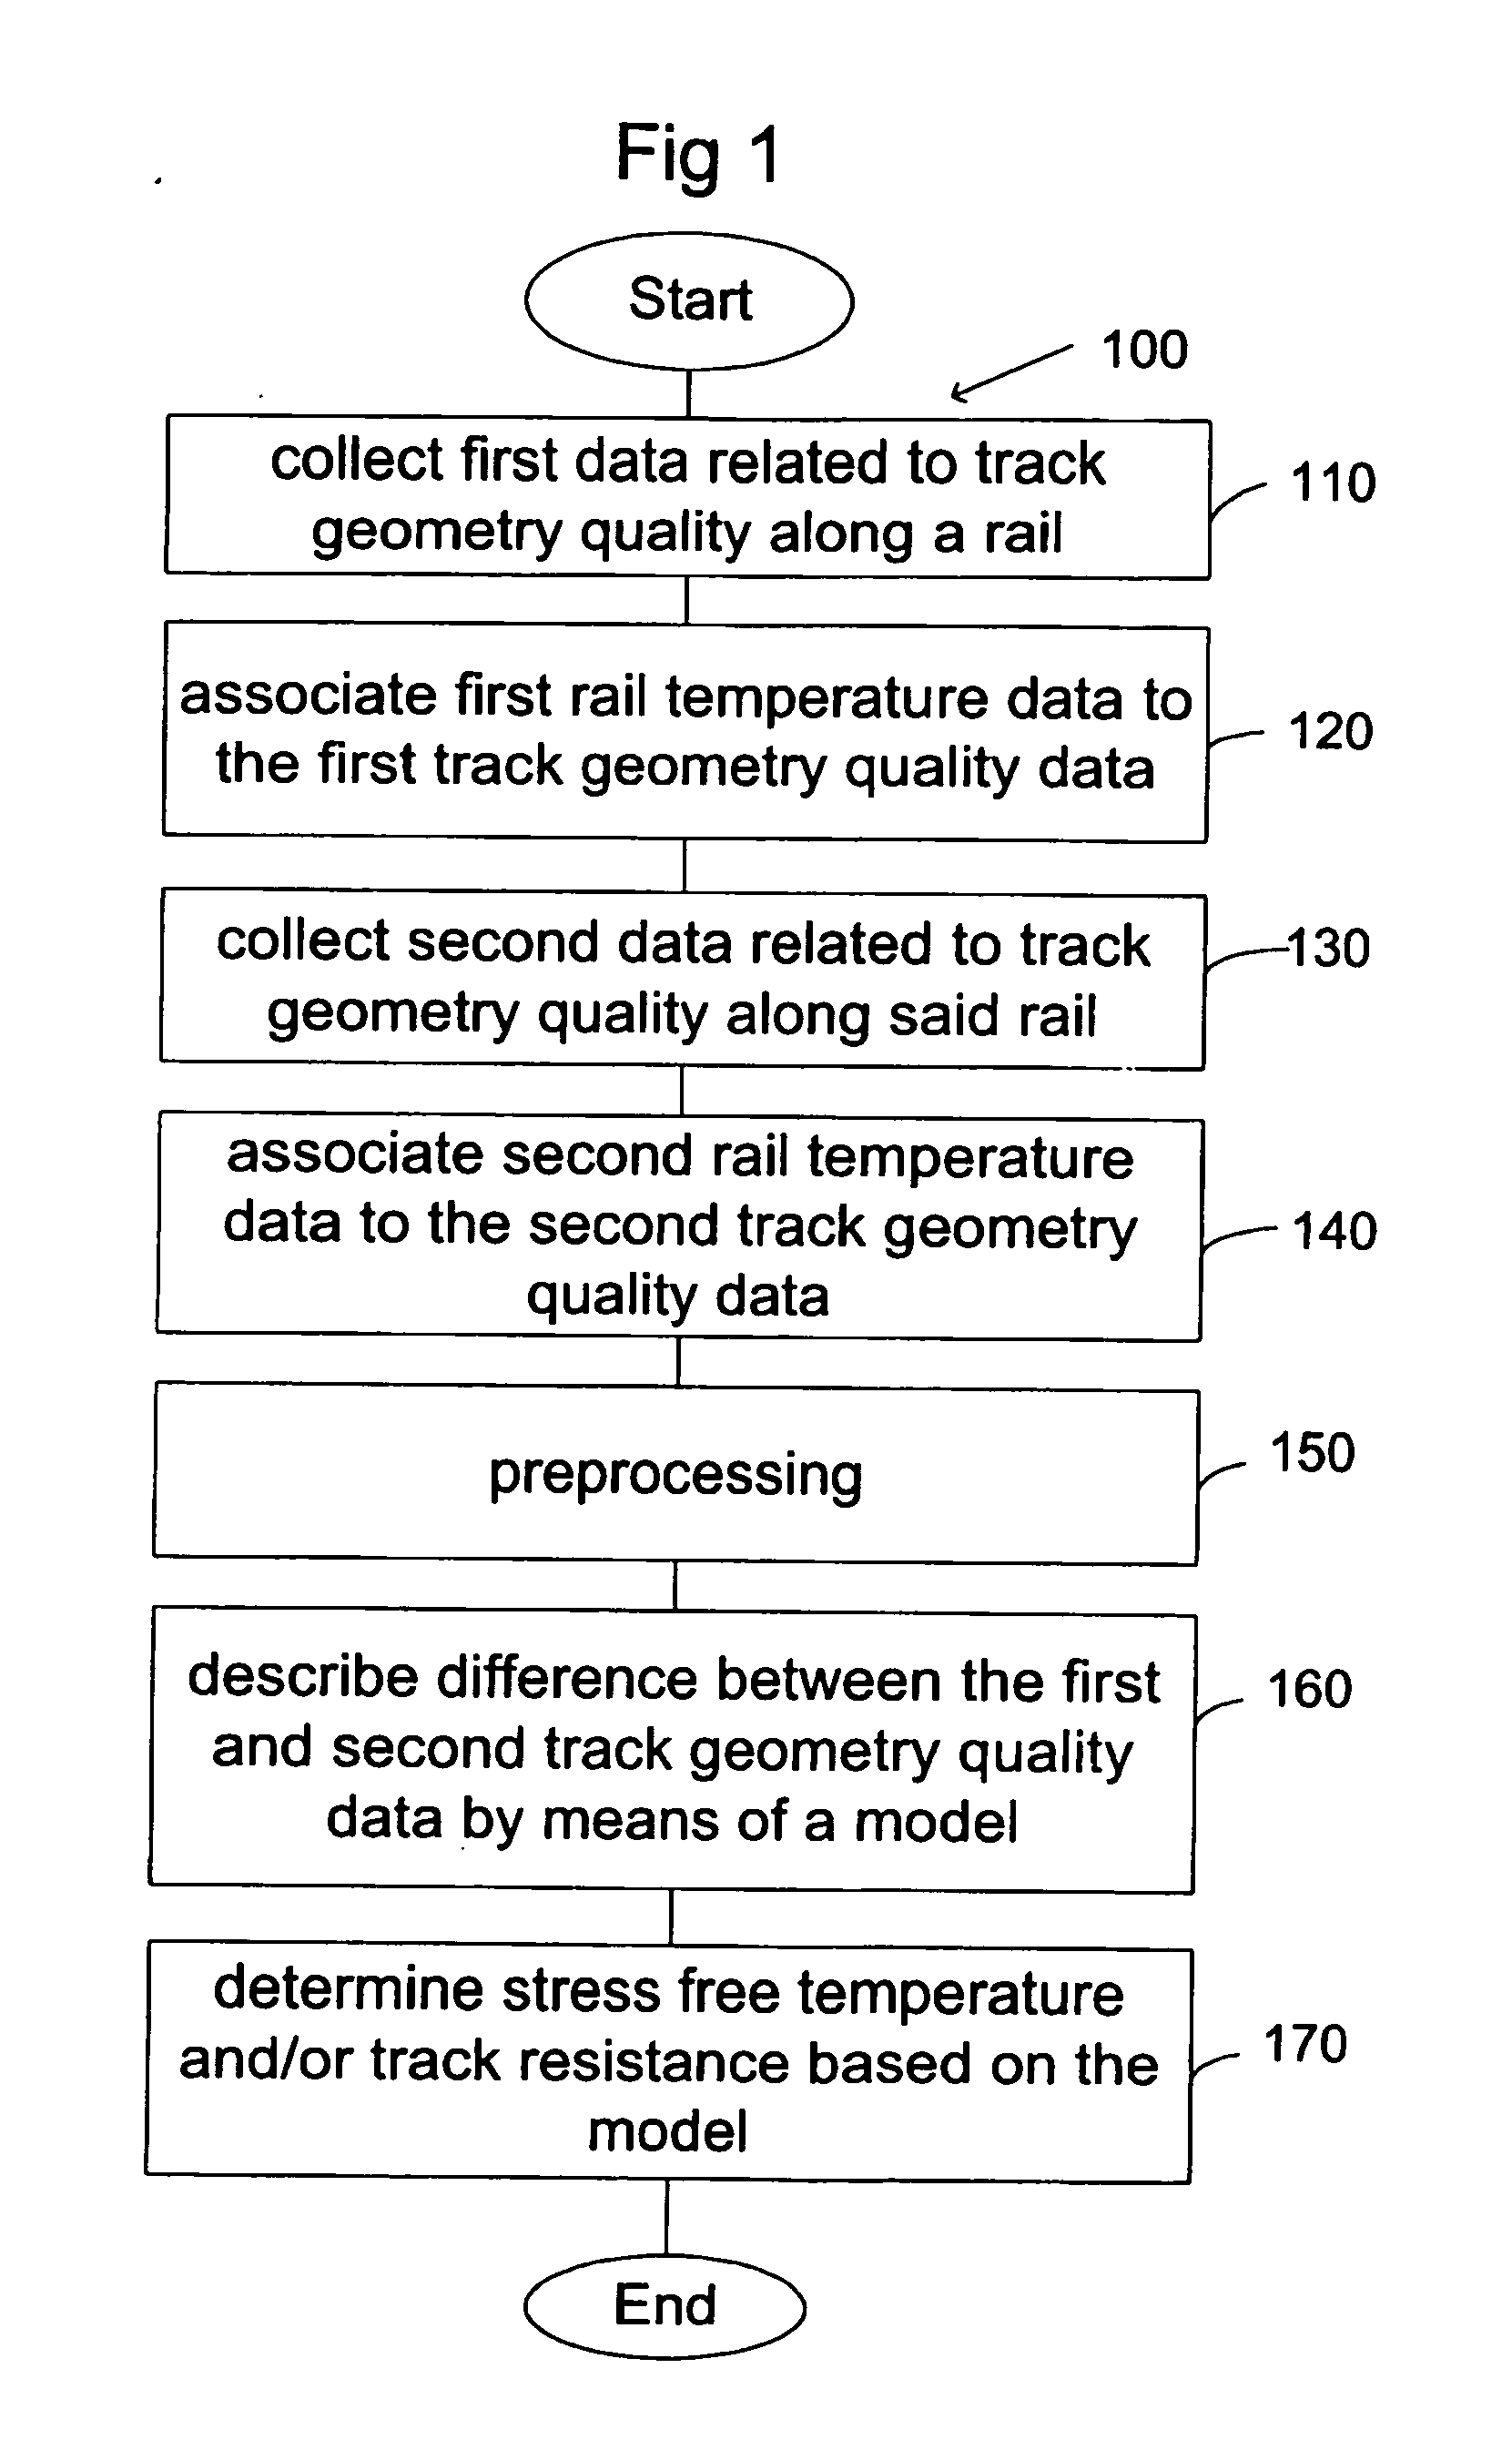 Method for determining the stress free temperature of the rail and/or the track resistance